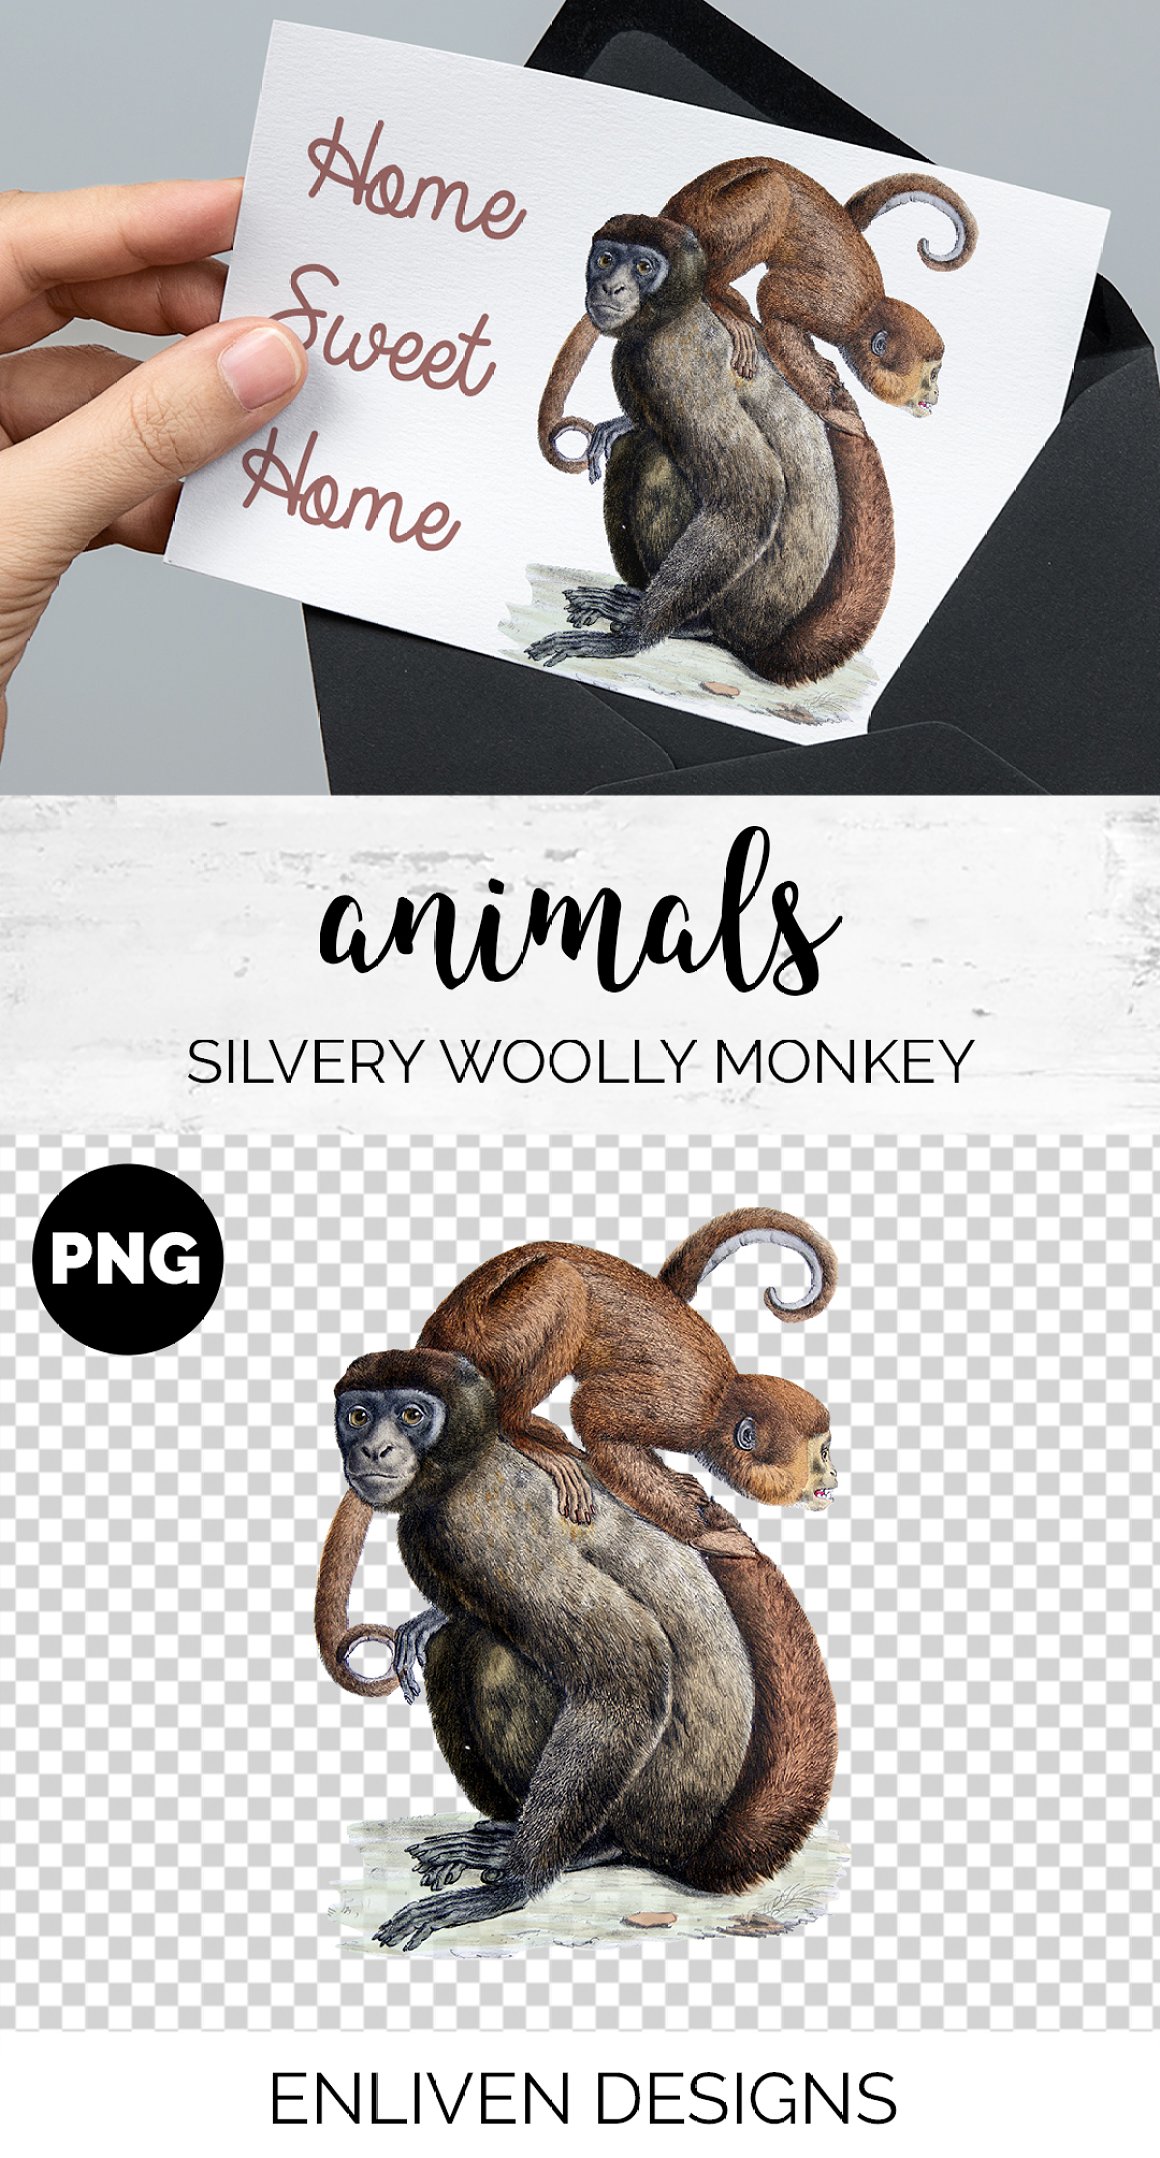 All monkey illustrations have a transparent background and will perfect on different textures.